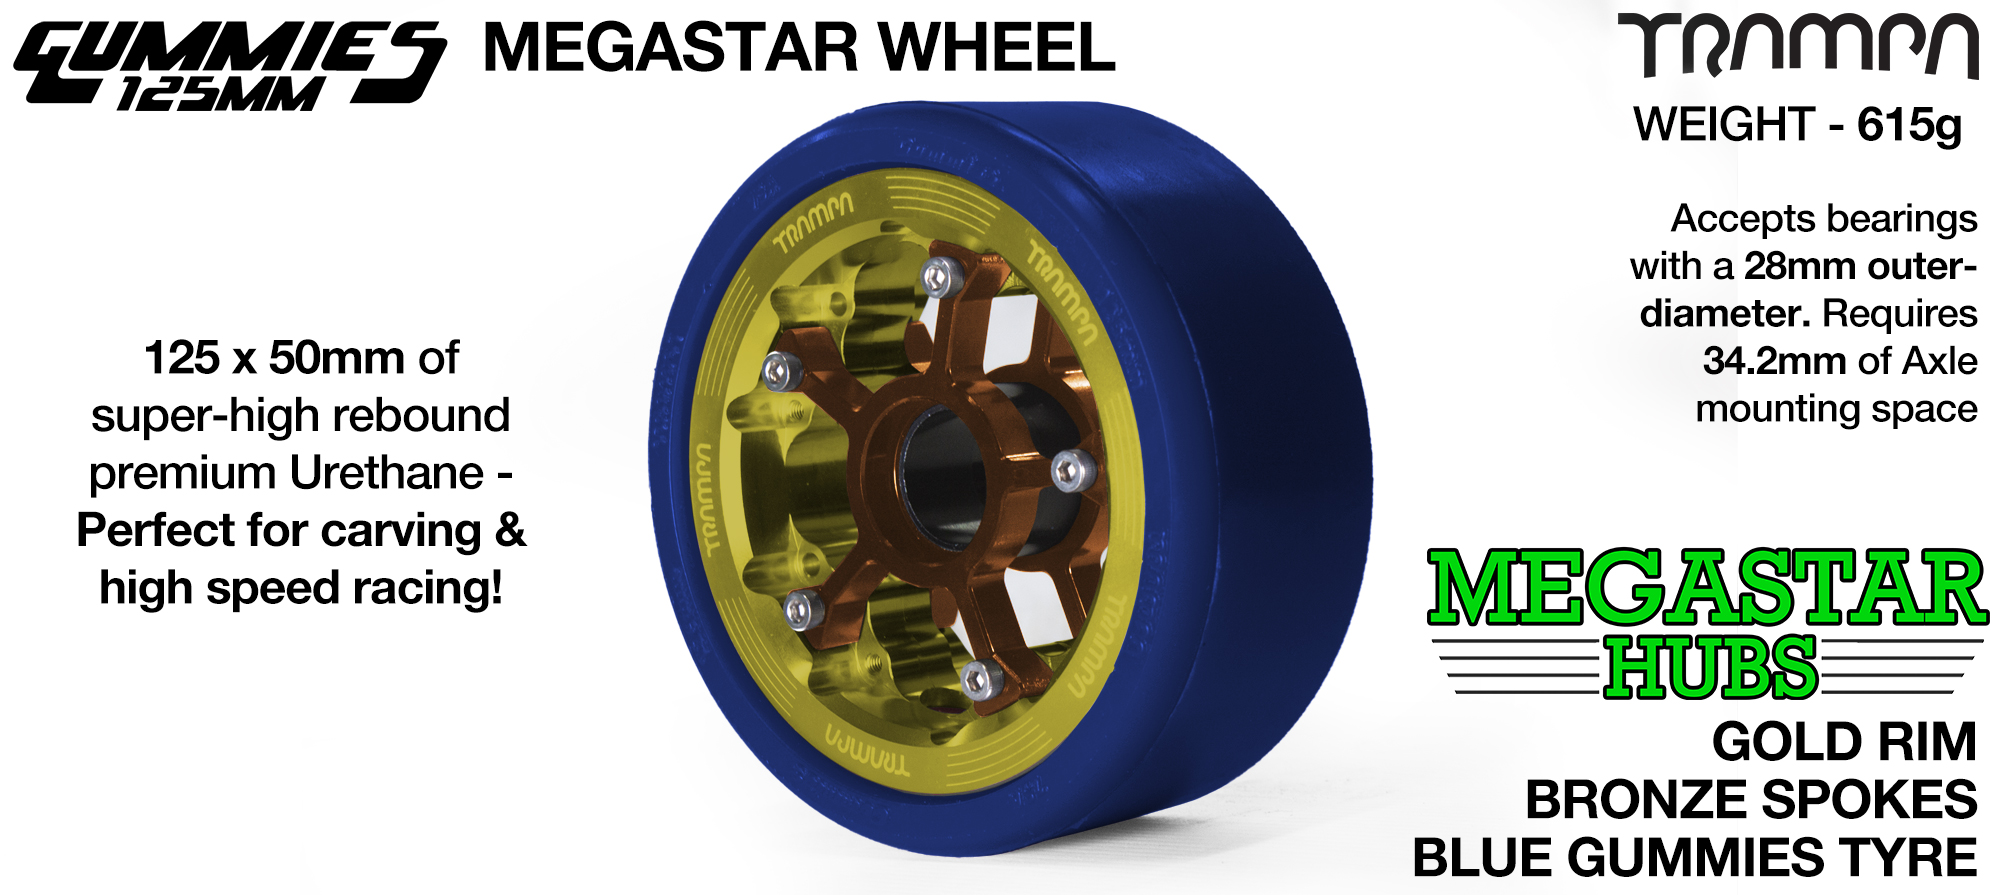 GOLD CENTER-SET MEGASTAR 8 Rim with BRONZE Spokes with BLUE Gummies  - The Ultimate Longboard Wheel